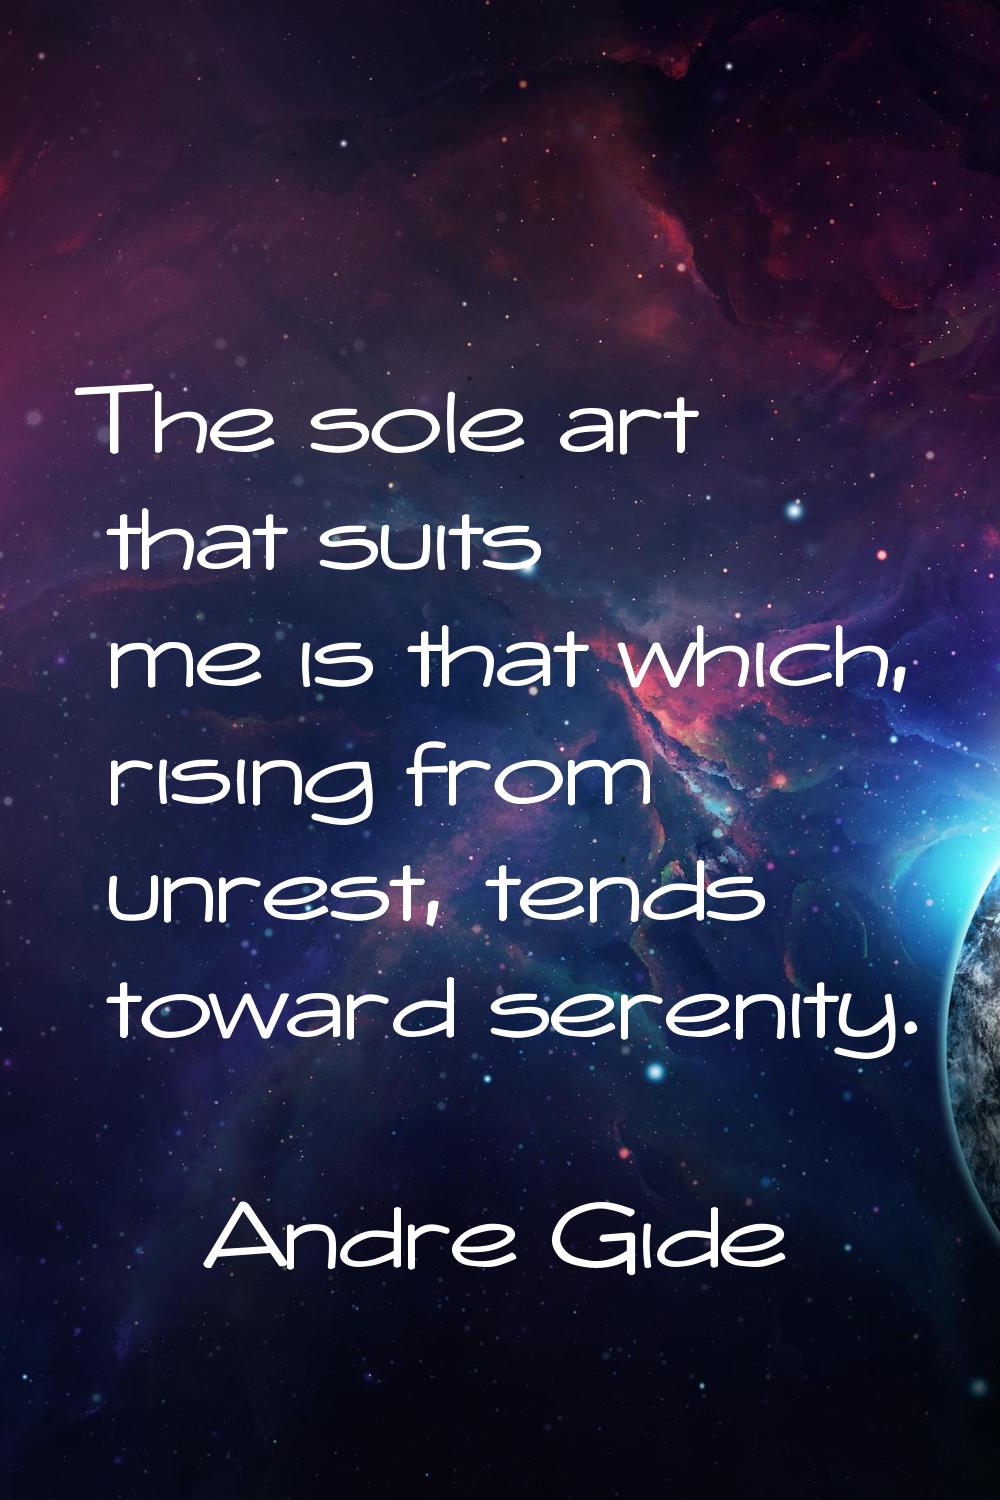 The sole art that suits me is that which, rising from unrest, tends toward serenity.